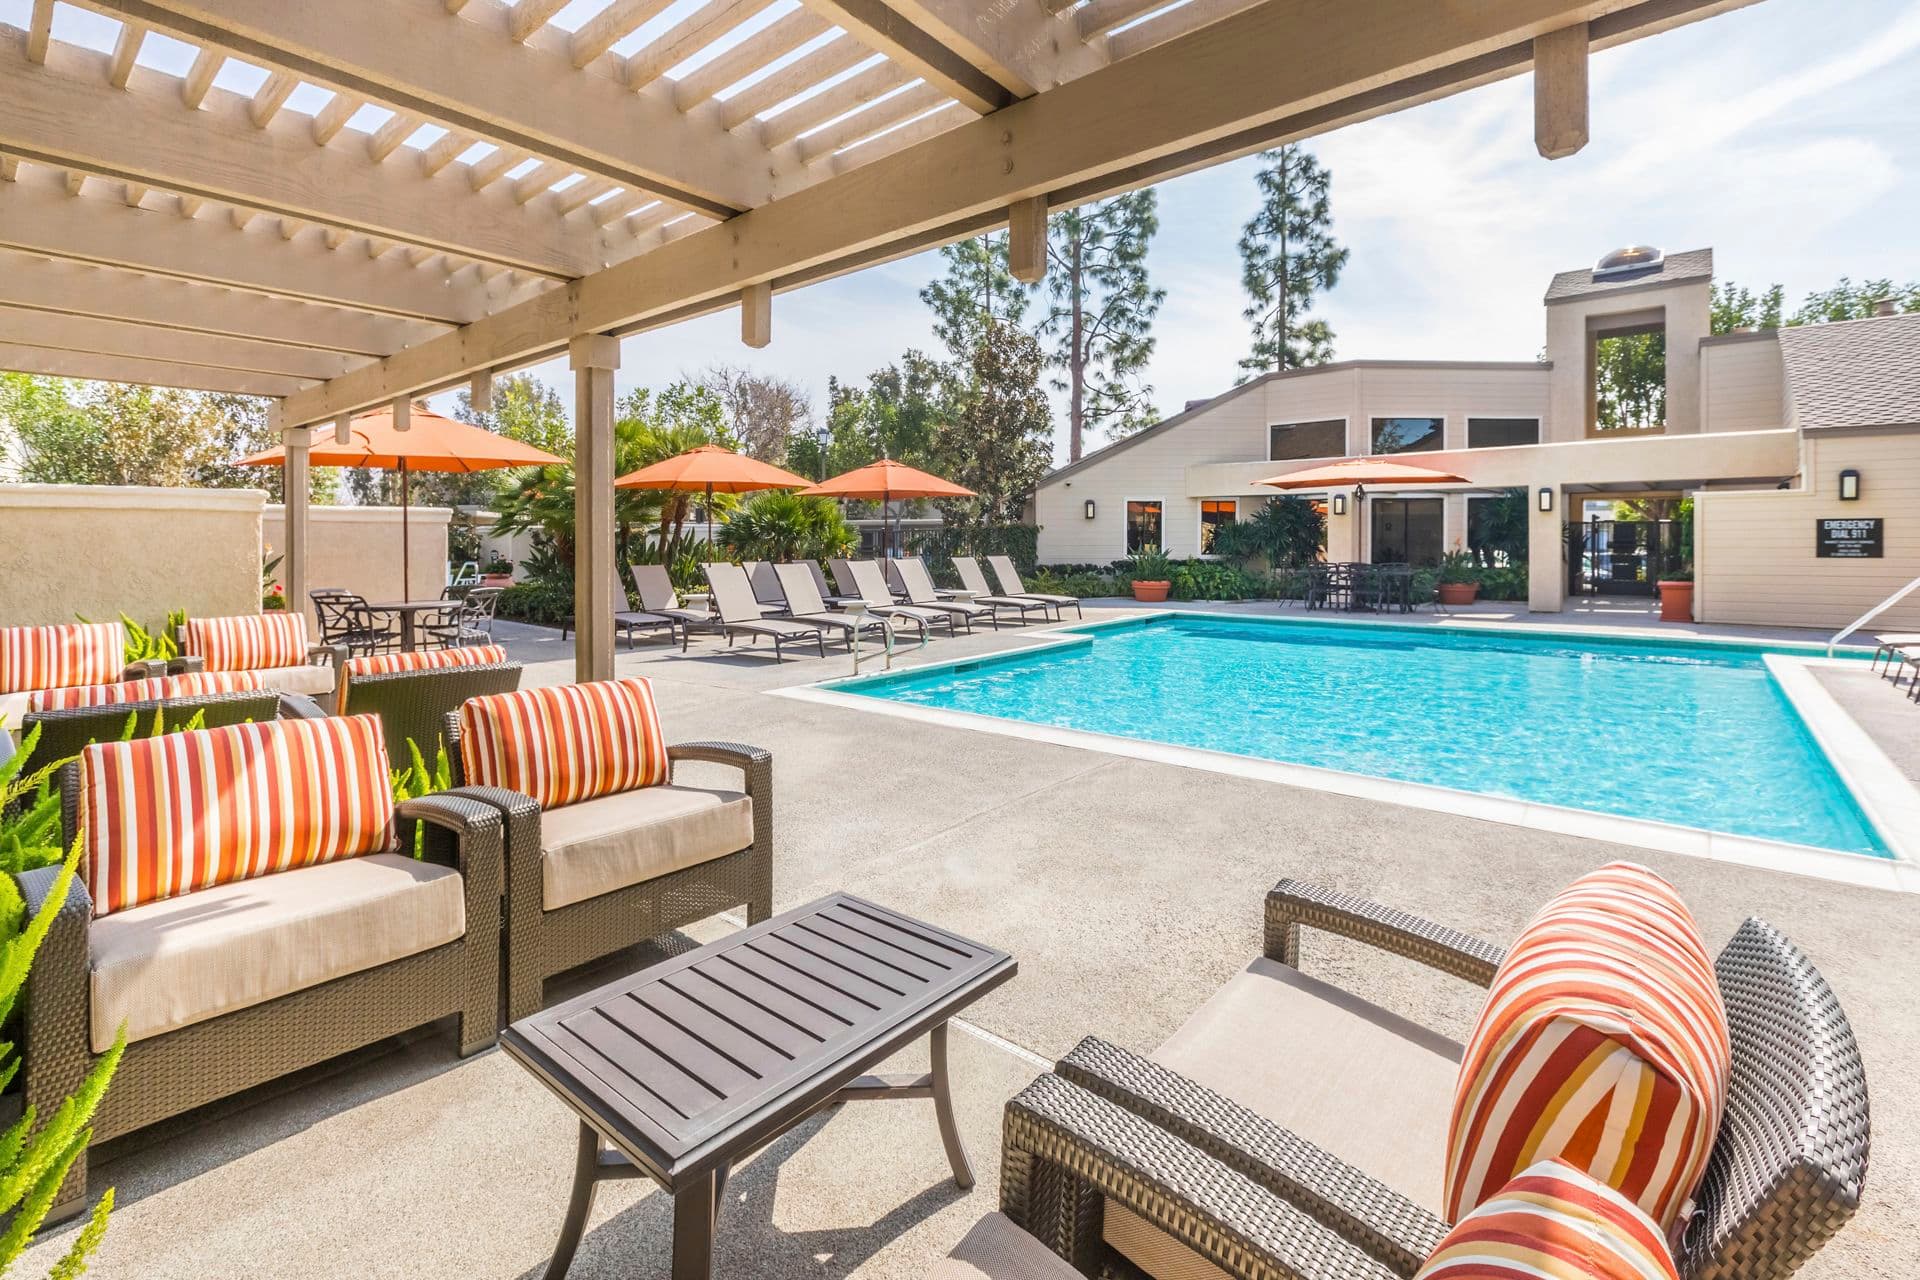 Exterior view of pool at Cross Creek Apartment Homes in Irvine, CA.